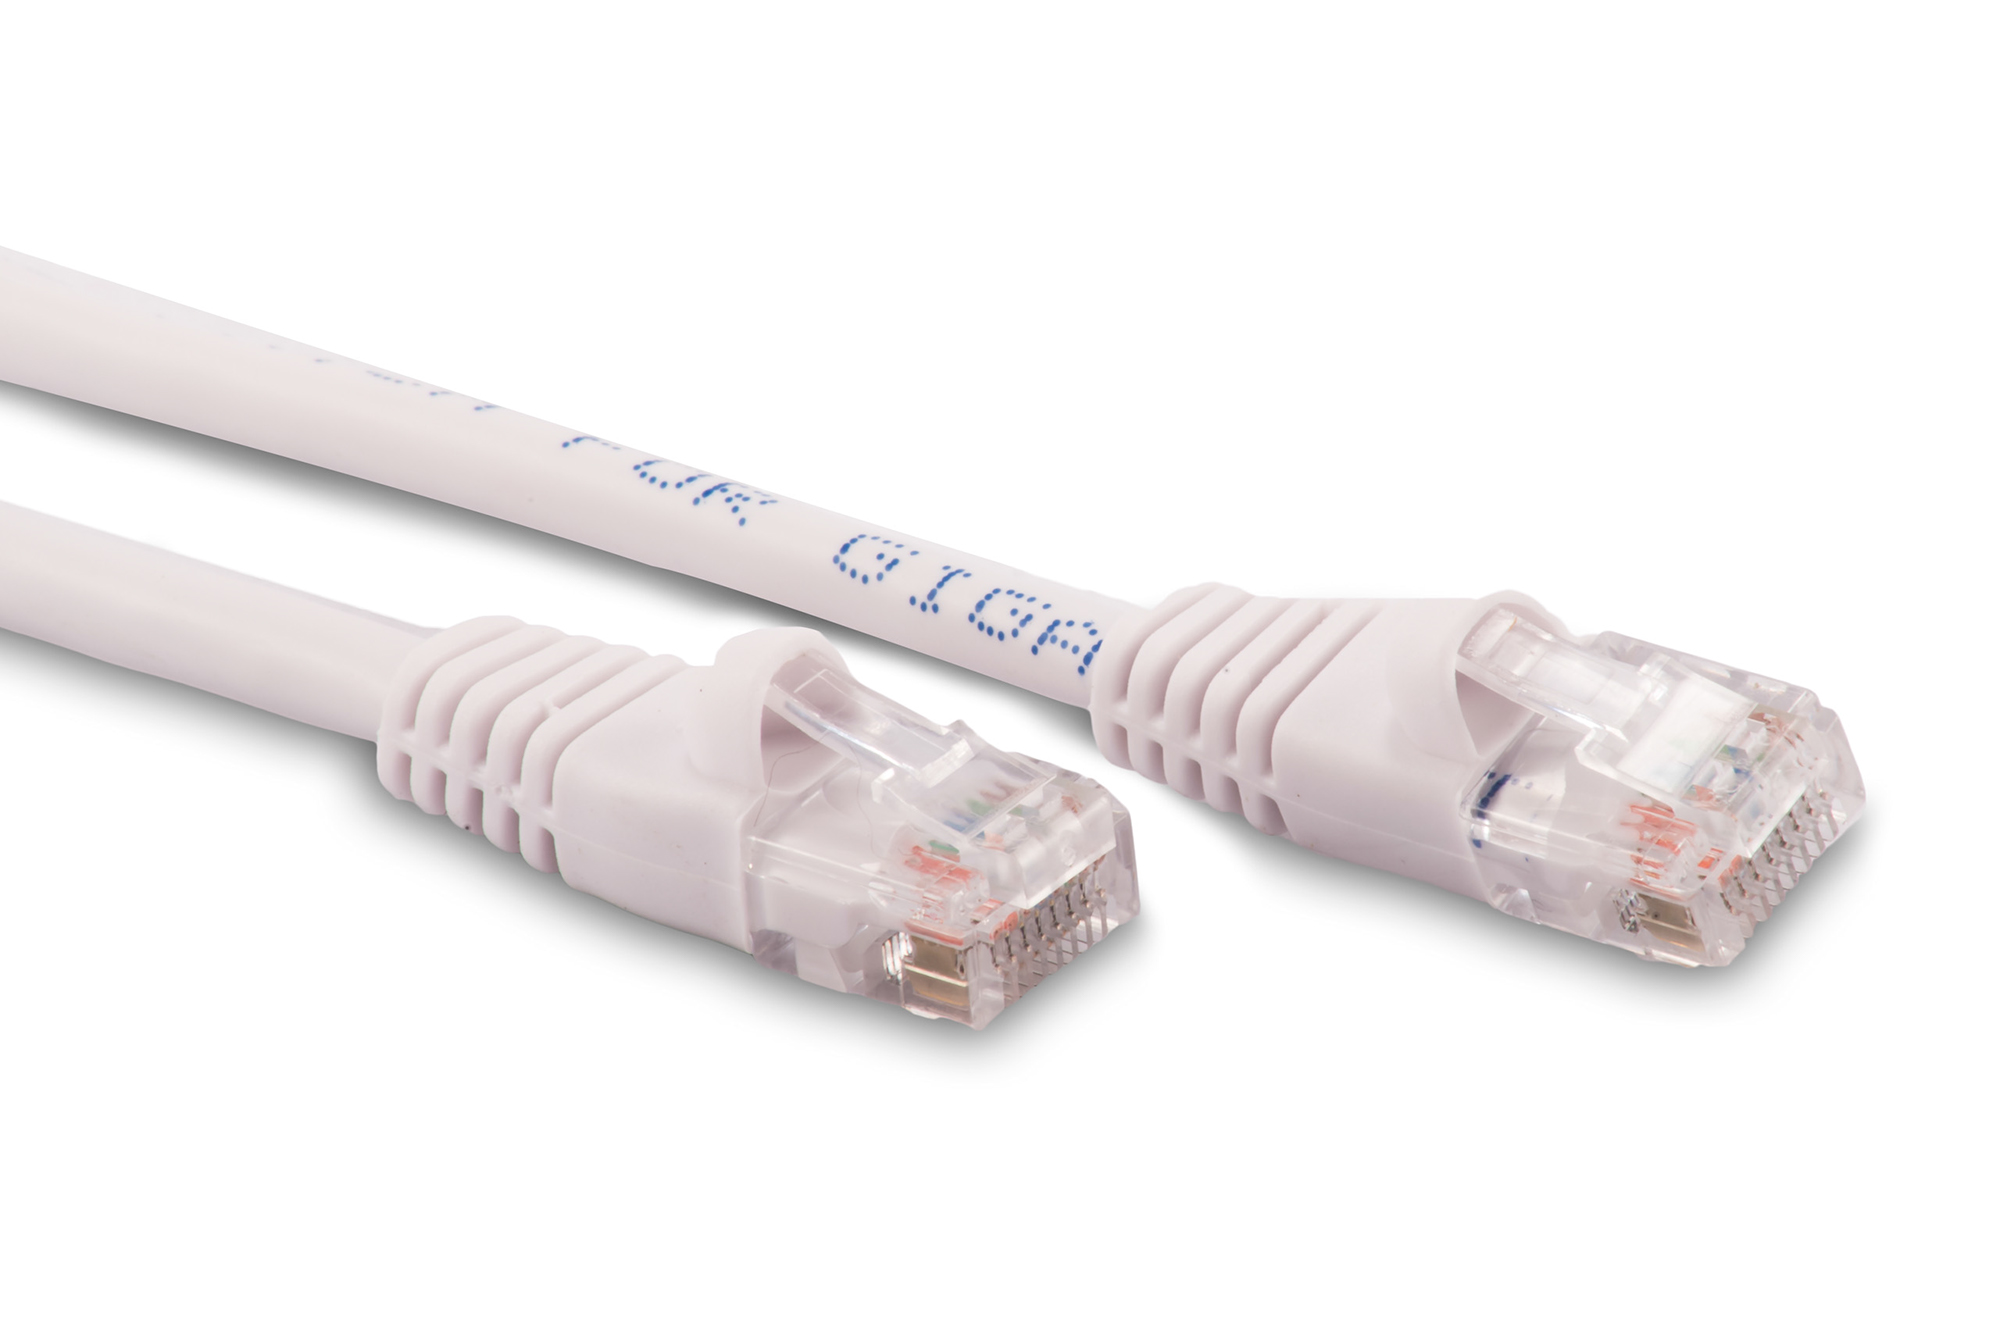 150ft Cat6 Ethernet Patch Cable - White Color - Snagless Boot